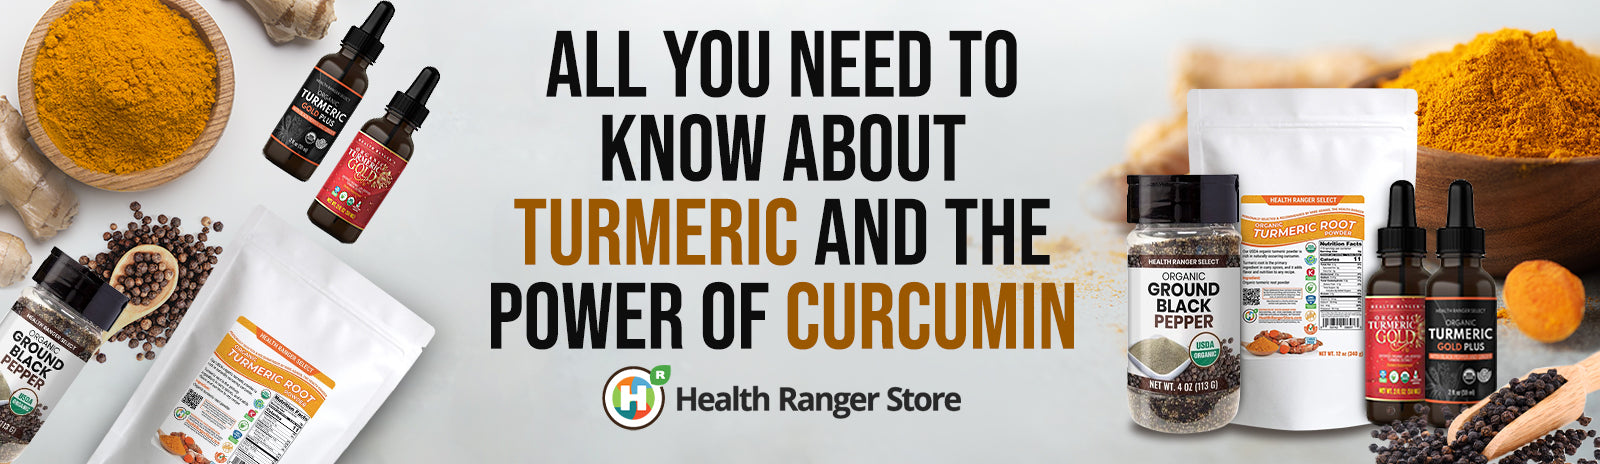 All you need to know about turmeric and the power of curcumin